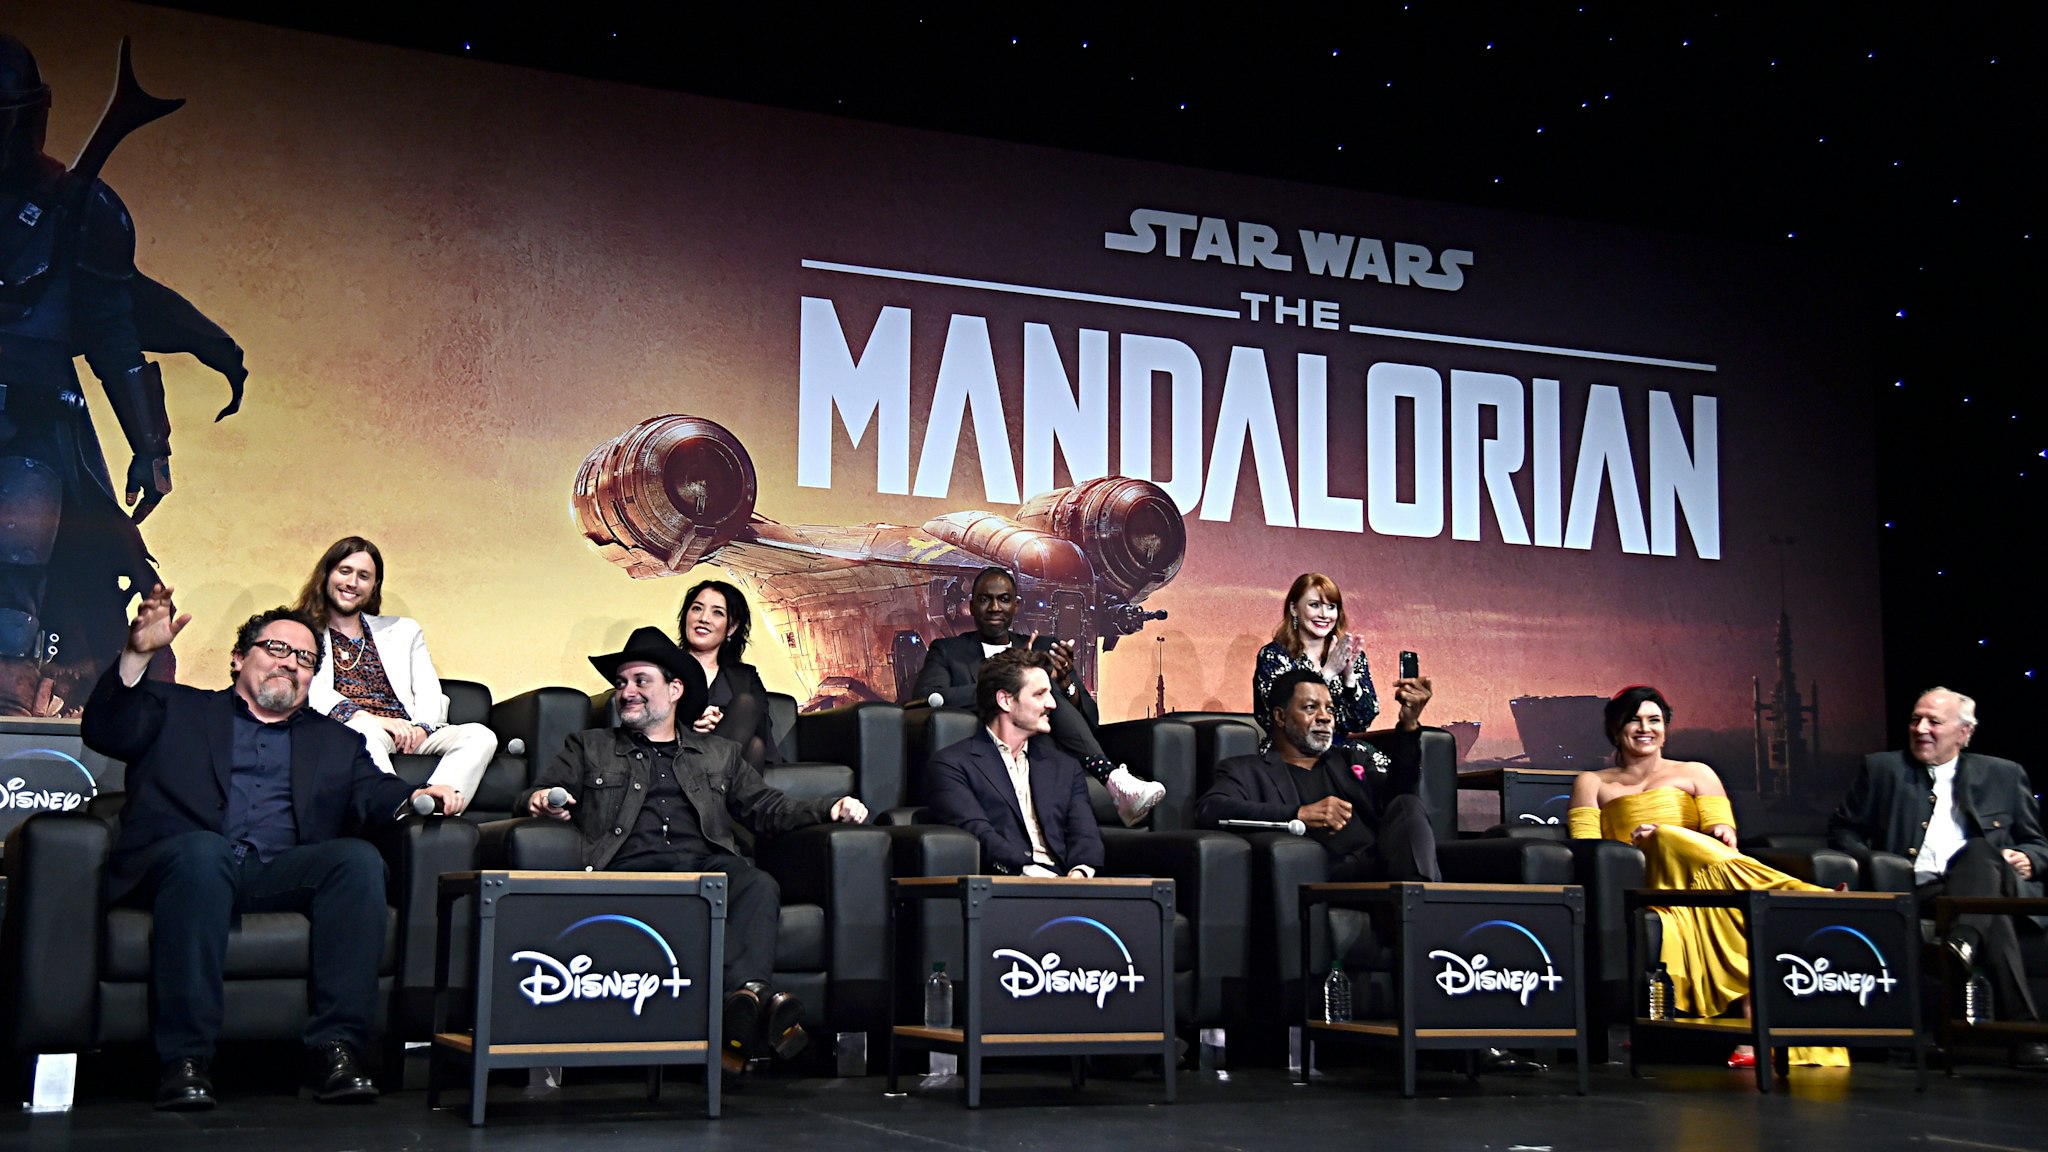 HOLLYWOOD, CALIFORNIA - NOVEMBER 13: (L-R) Executive Producer Jon Favreau, Composer Ludwig Göransson, Executive Producer/Director Dave Filoni, Director Deborah Chow, Pedro Pascal, Rick Famuyiwa, Carl Weathers, Director Bryce Dallas Howard, Gina Carano and Werner Herzog speak onstage at the premiere of Lucasfilm's first-ever, live-action series, "The Mandalorian," at the El Capitan Theatre in Hollywood, Calif. on November 13, 2019. "The Mandalorian" streams exclusively on Disney+. (Photo by Alberto E. Rodriguez/Getty Images for Disney)